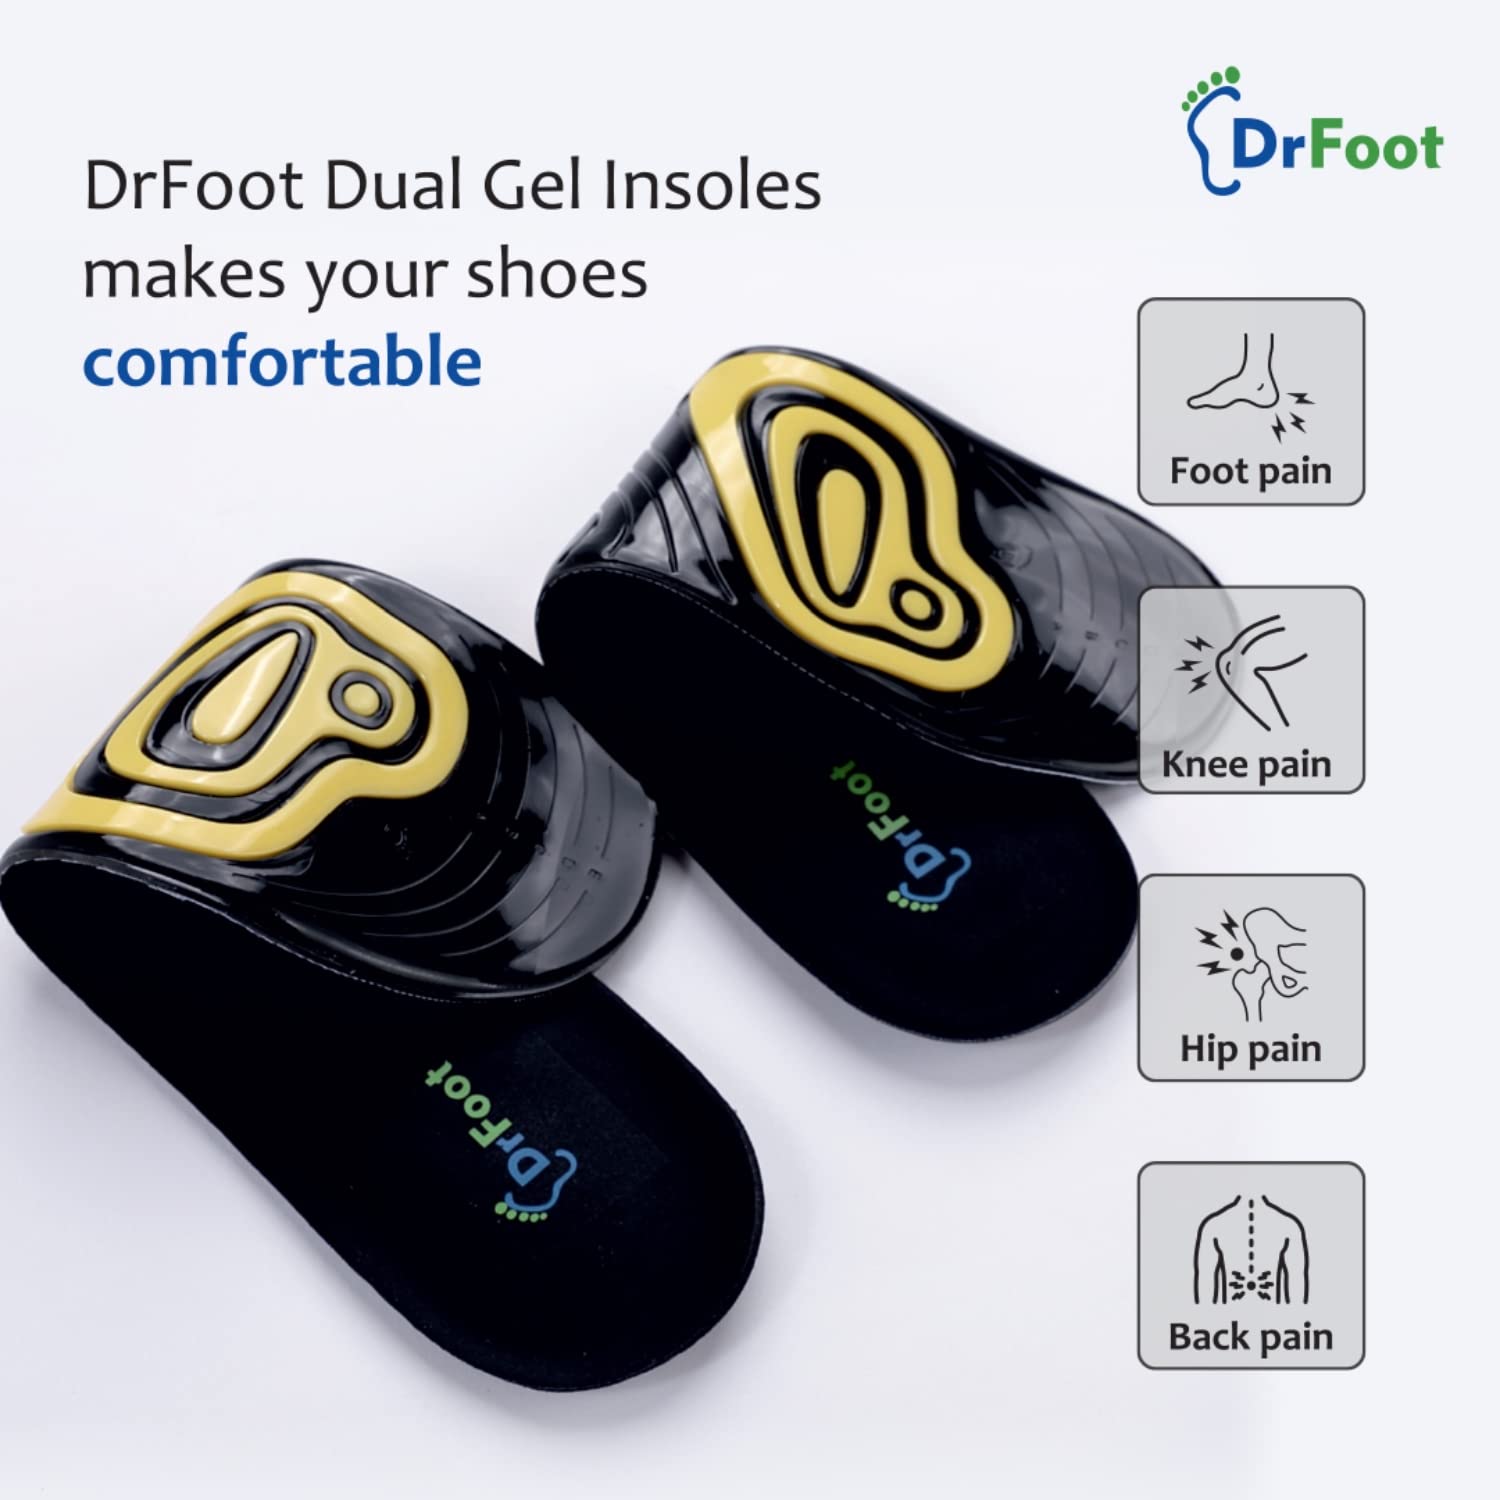 Dr Foot Dual Gel Insoles Anti-Microbial | For Walking, Running, Hiking & Regular Use | All Day Ultra Comfrort & Support & Shock Absorption With Dual Gel Technology | For Men – 1 Pair (Pack of 2)